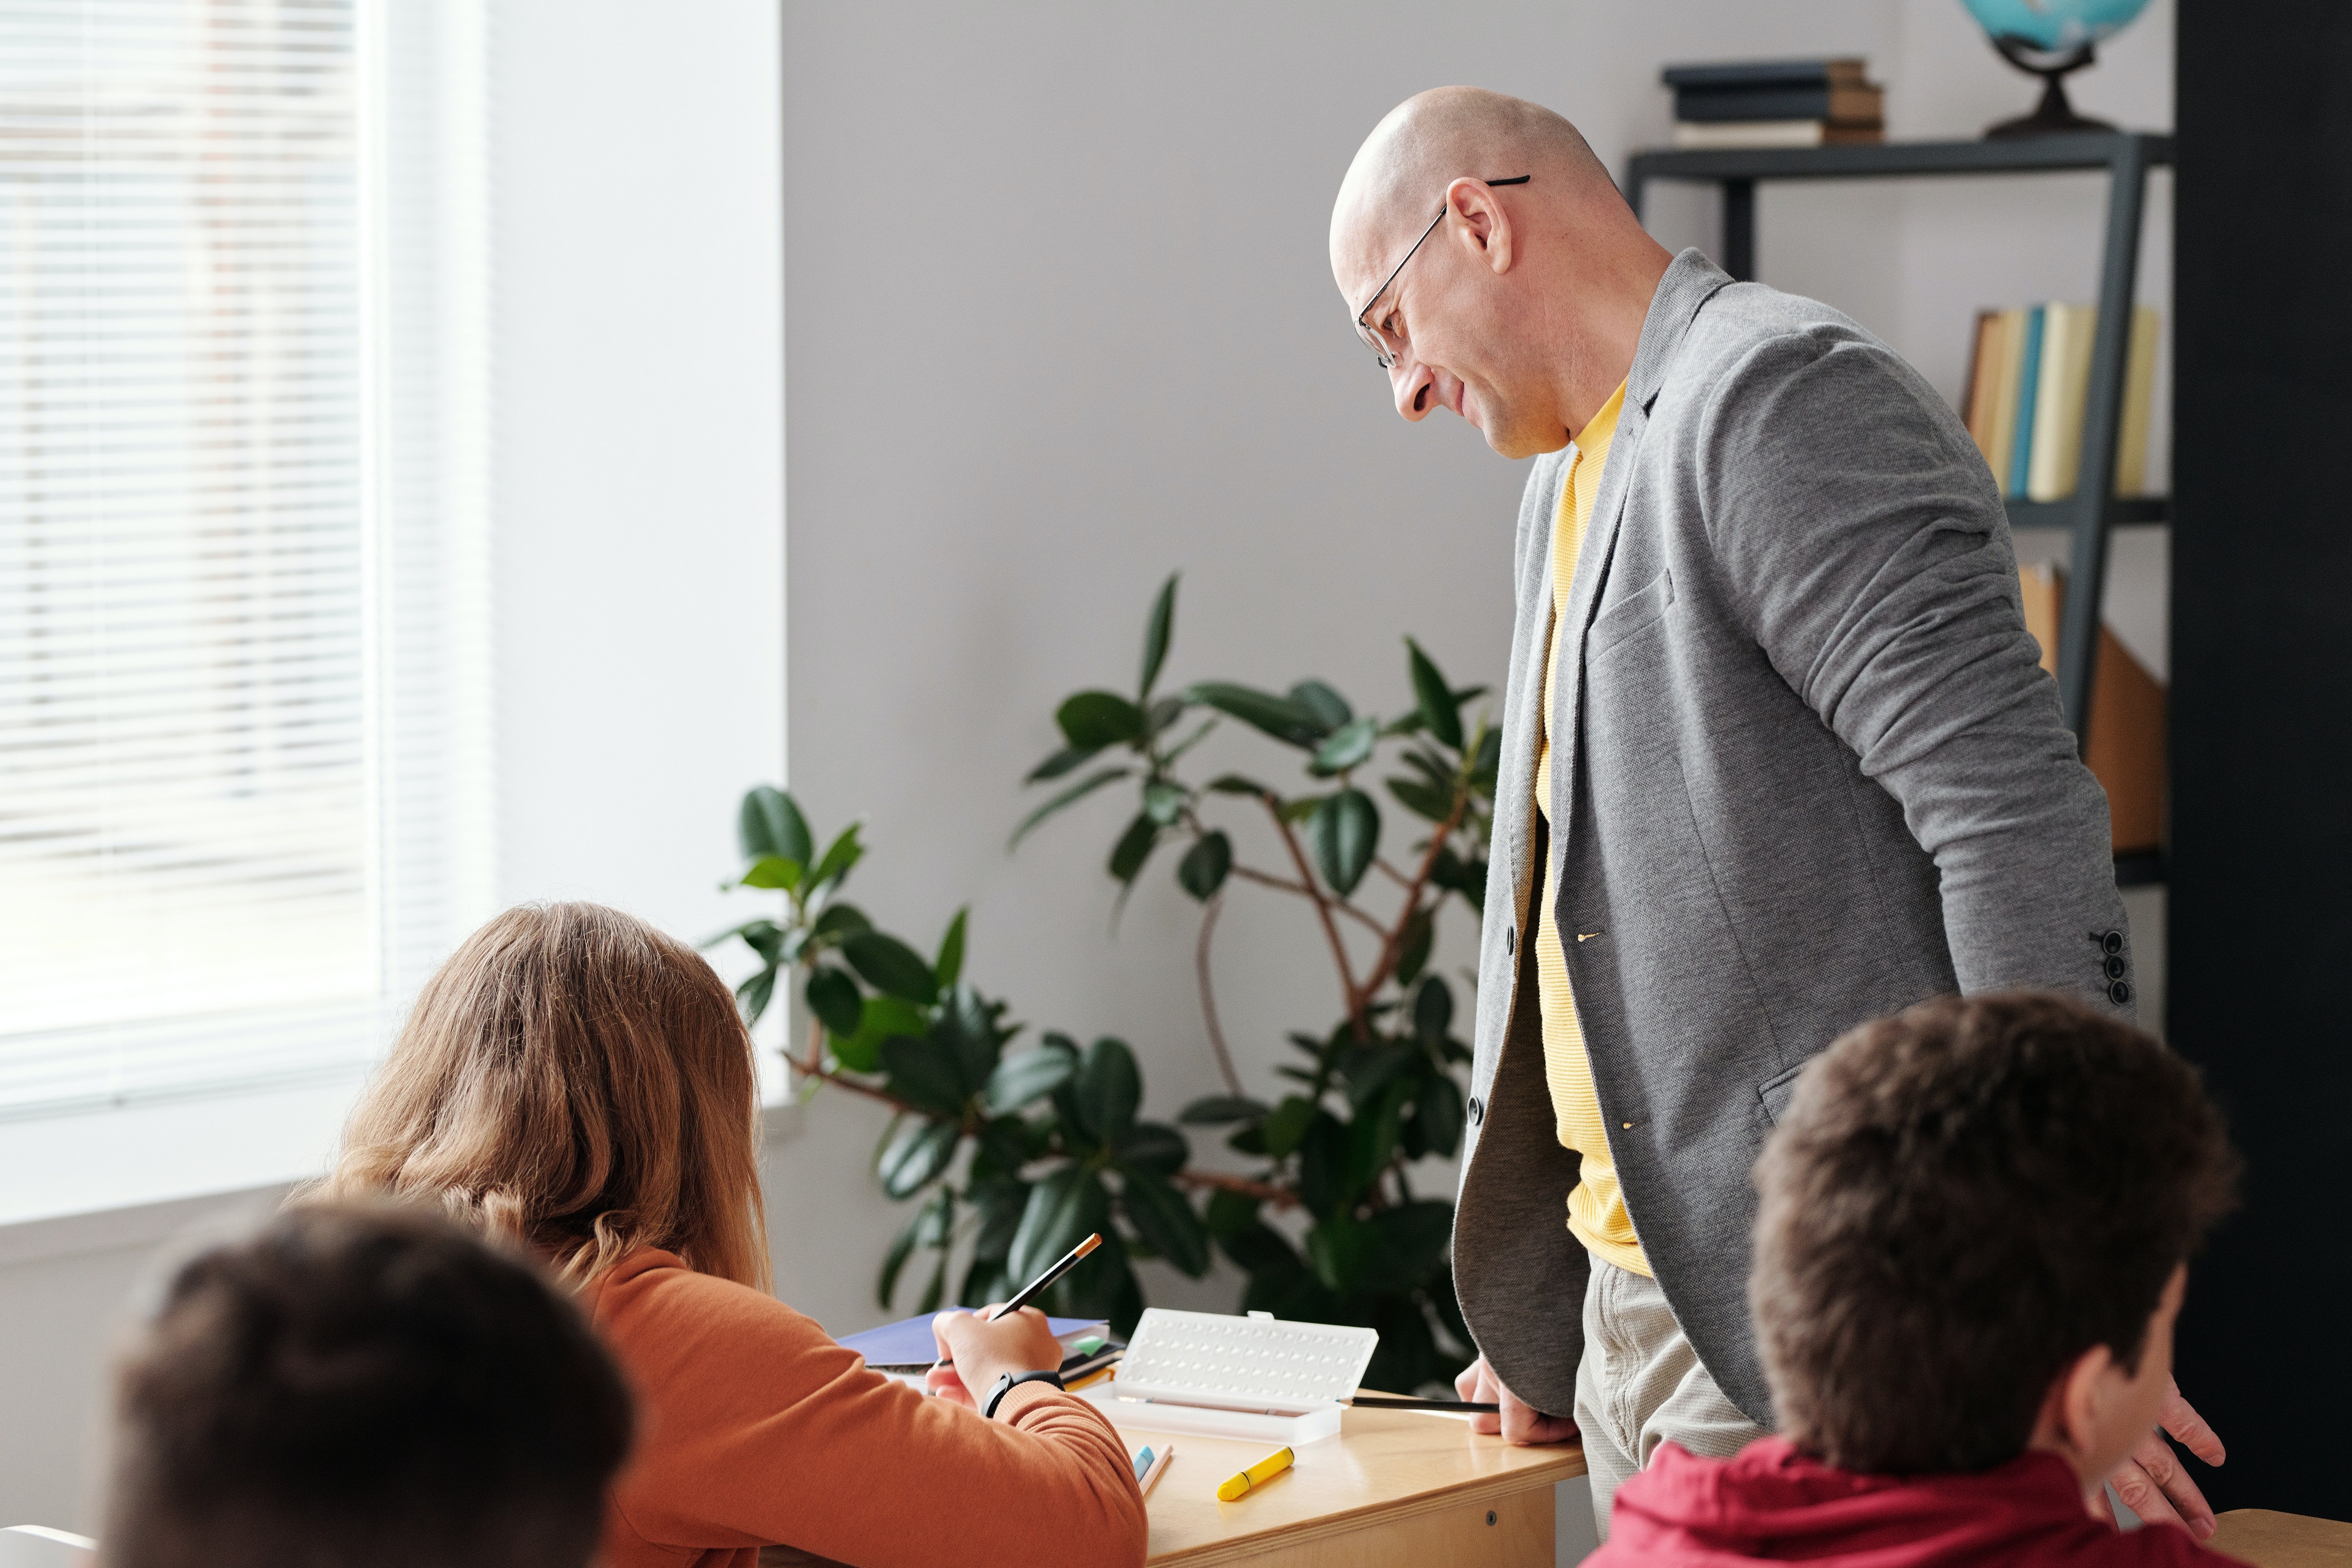 Pictured - A teacher looking over his student | Source: Pexels 